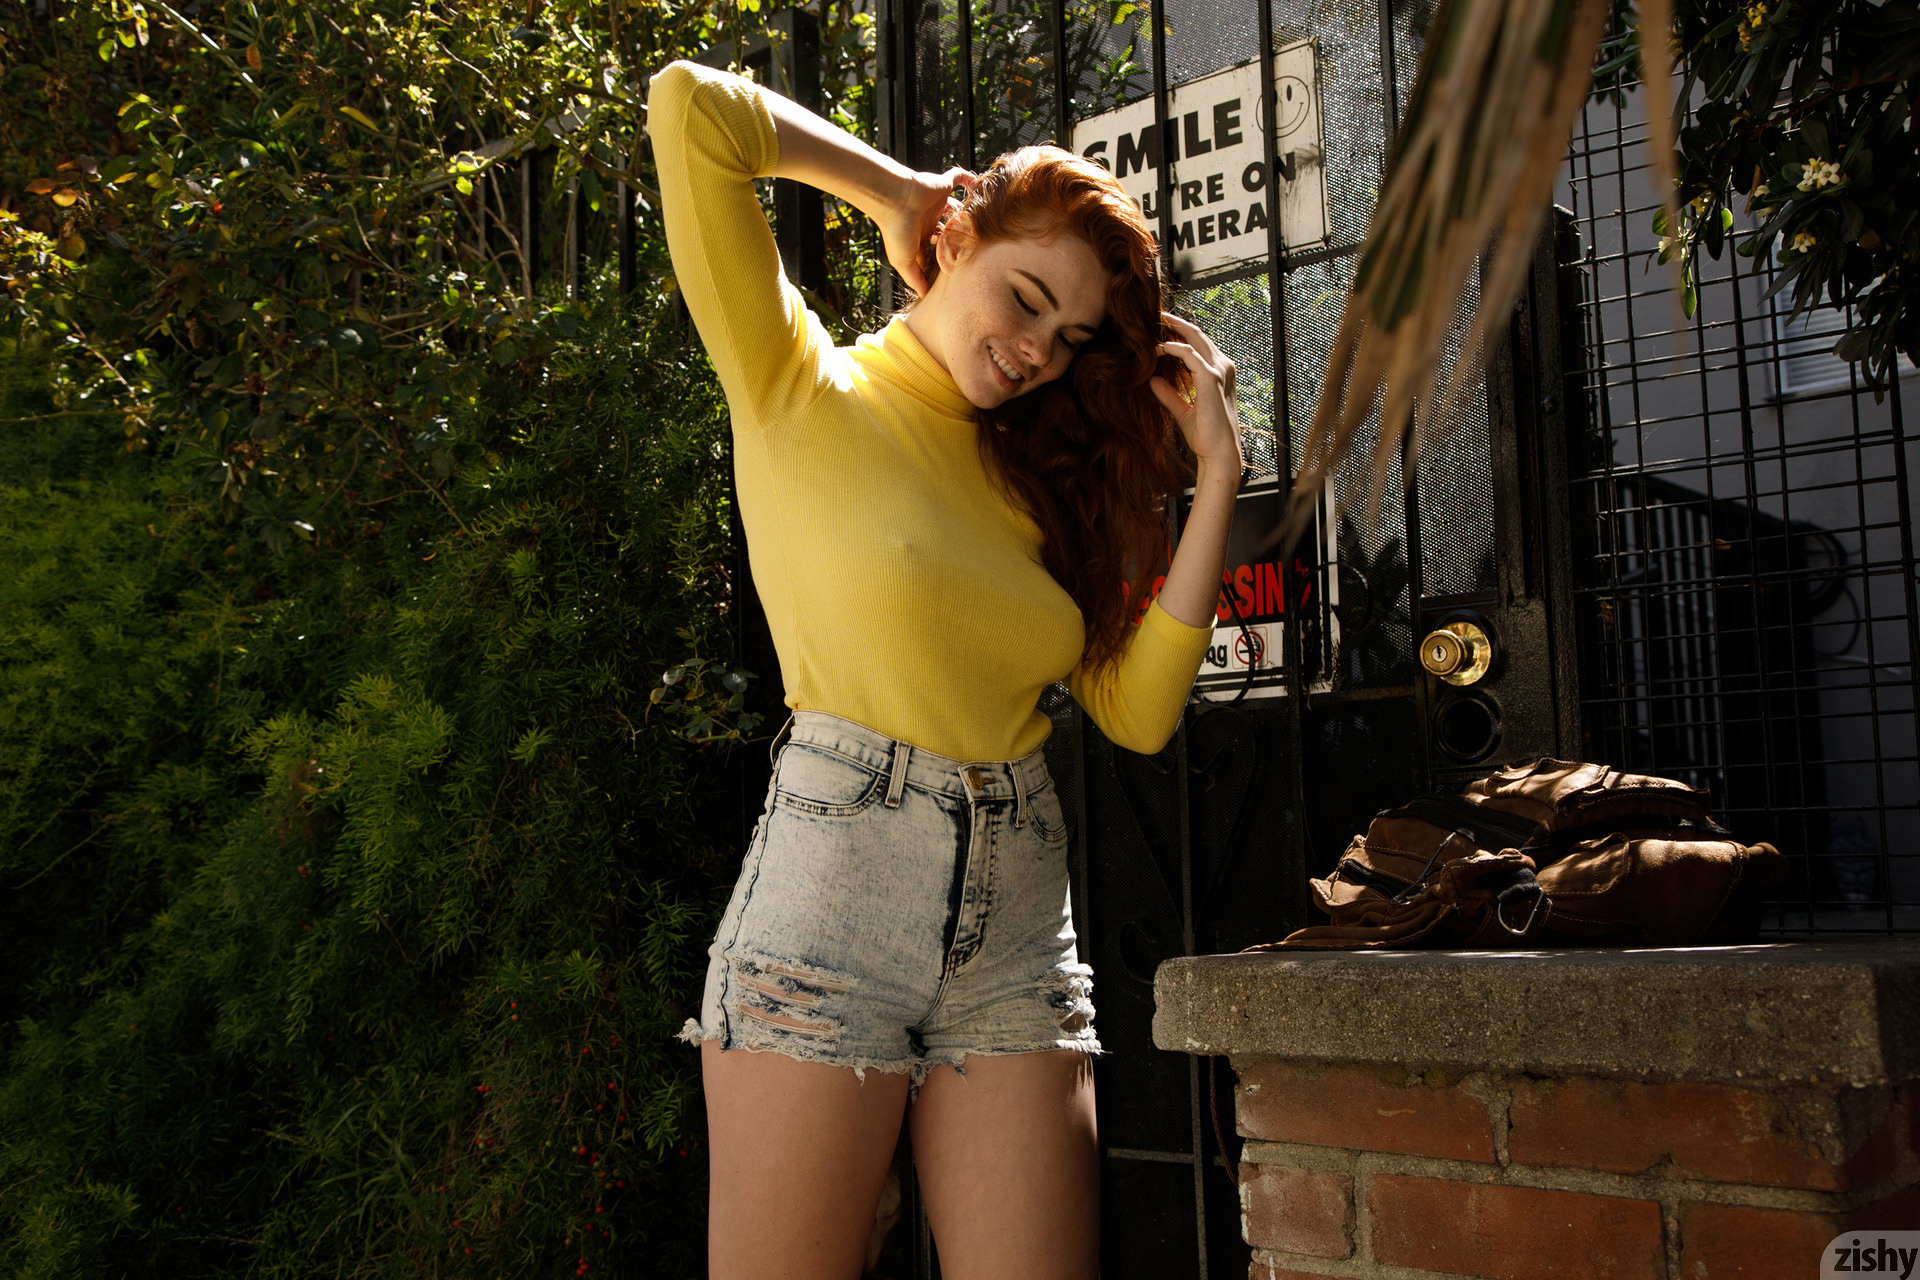 People 1920x1280 Sabrina Lynn redhead Zishy model women sunlight women outdoors high waisted shorts smiling hands in hair jean shorts nipples through clothing arms up closed eyes